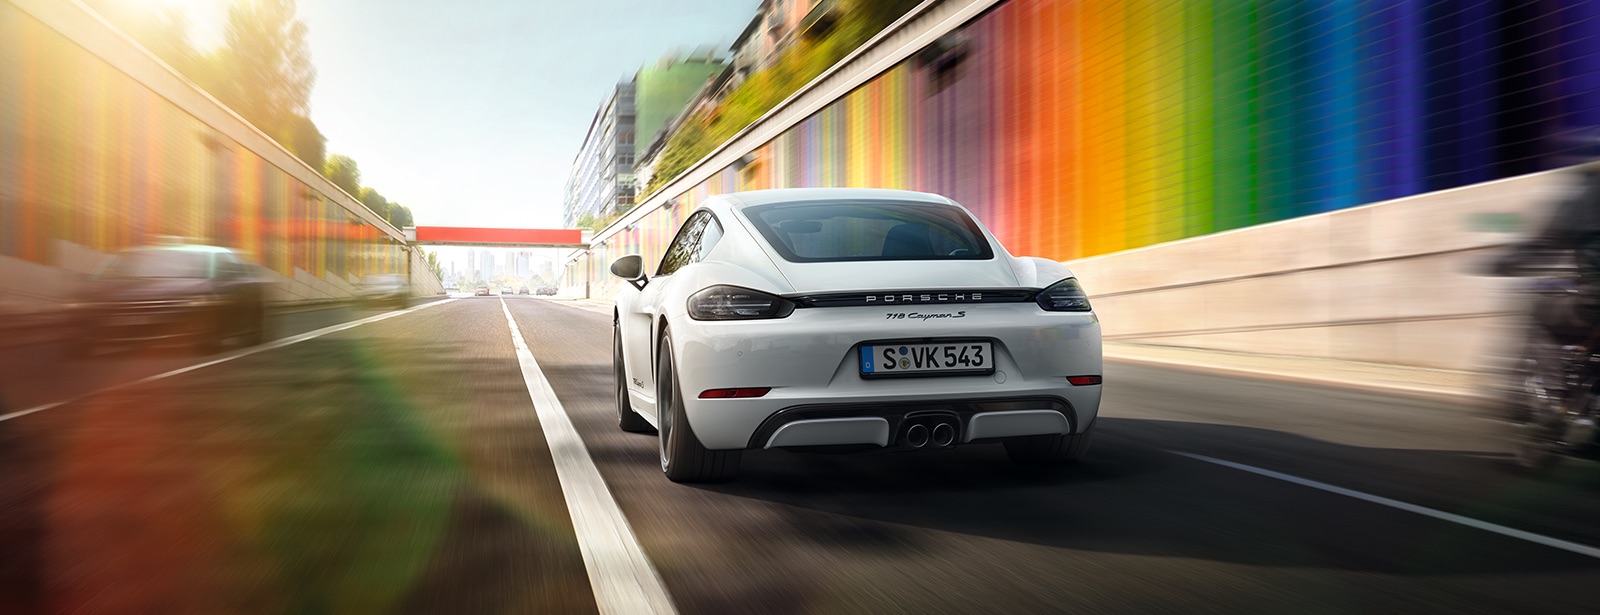 Porsche - Be Your Style with 718